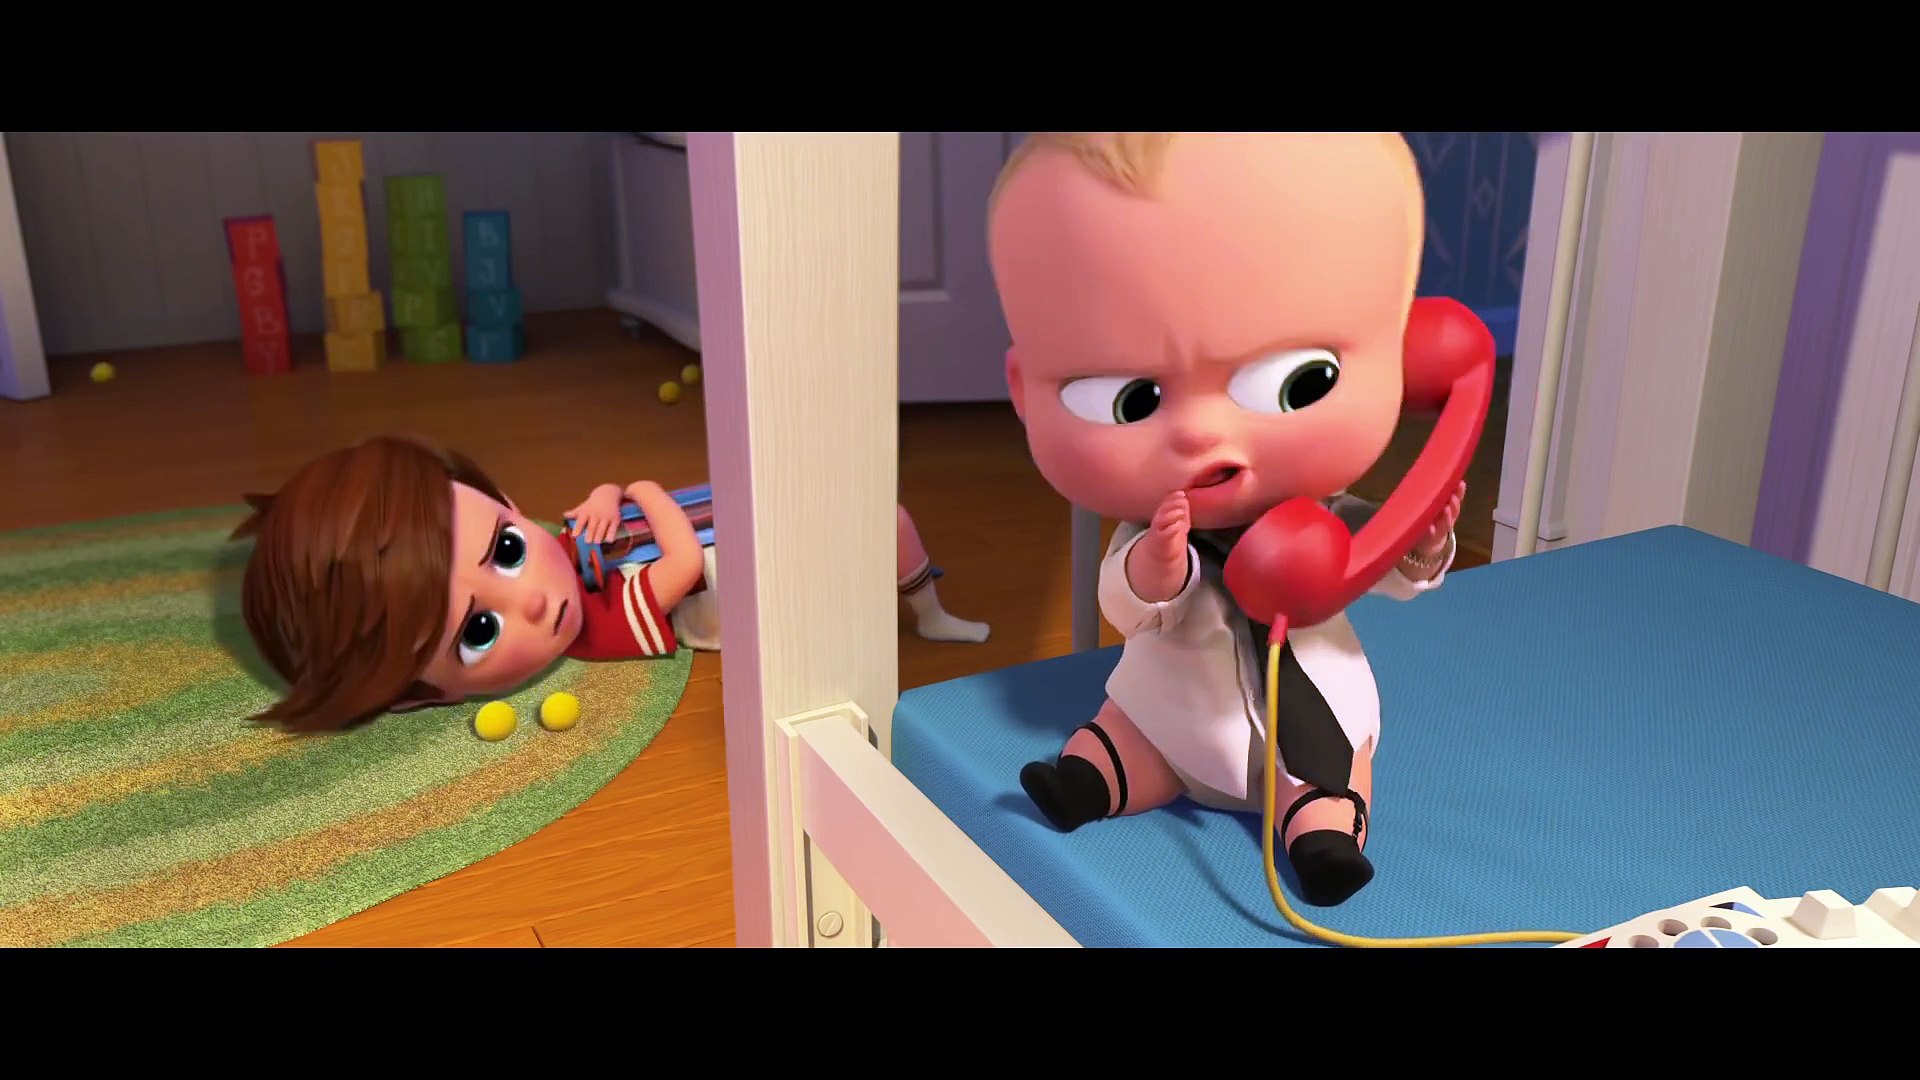 The Boss Baby Official Trailer 1 (2017) - Alec Baldwin Movie [Full  HD,1920x1080p] - Vidéo Dailymotion